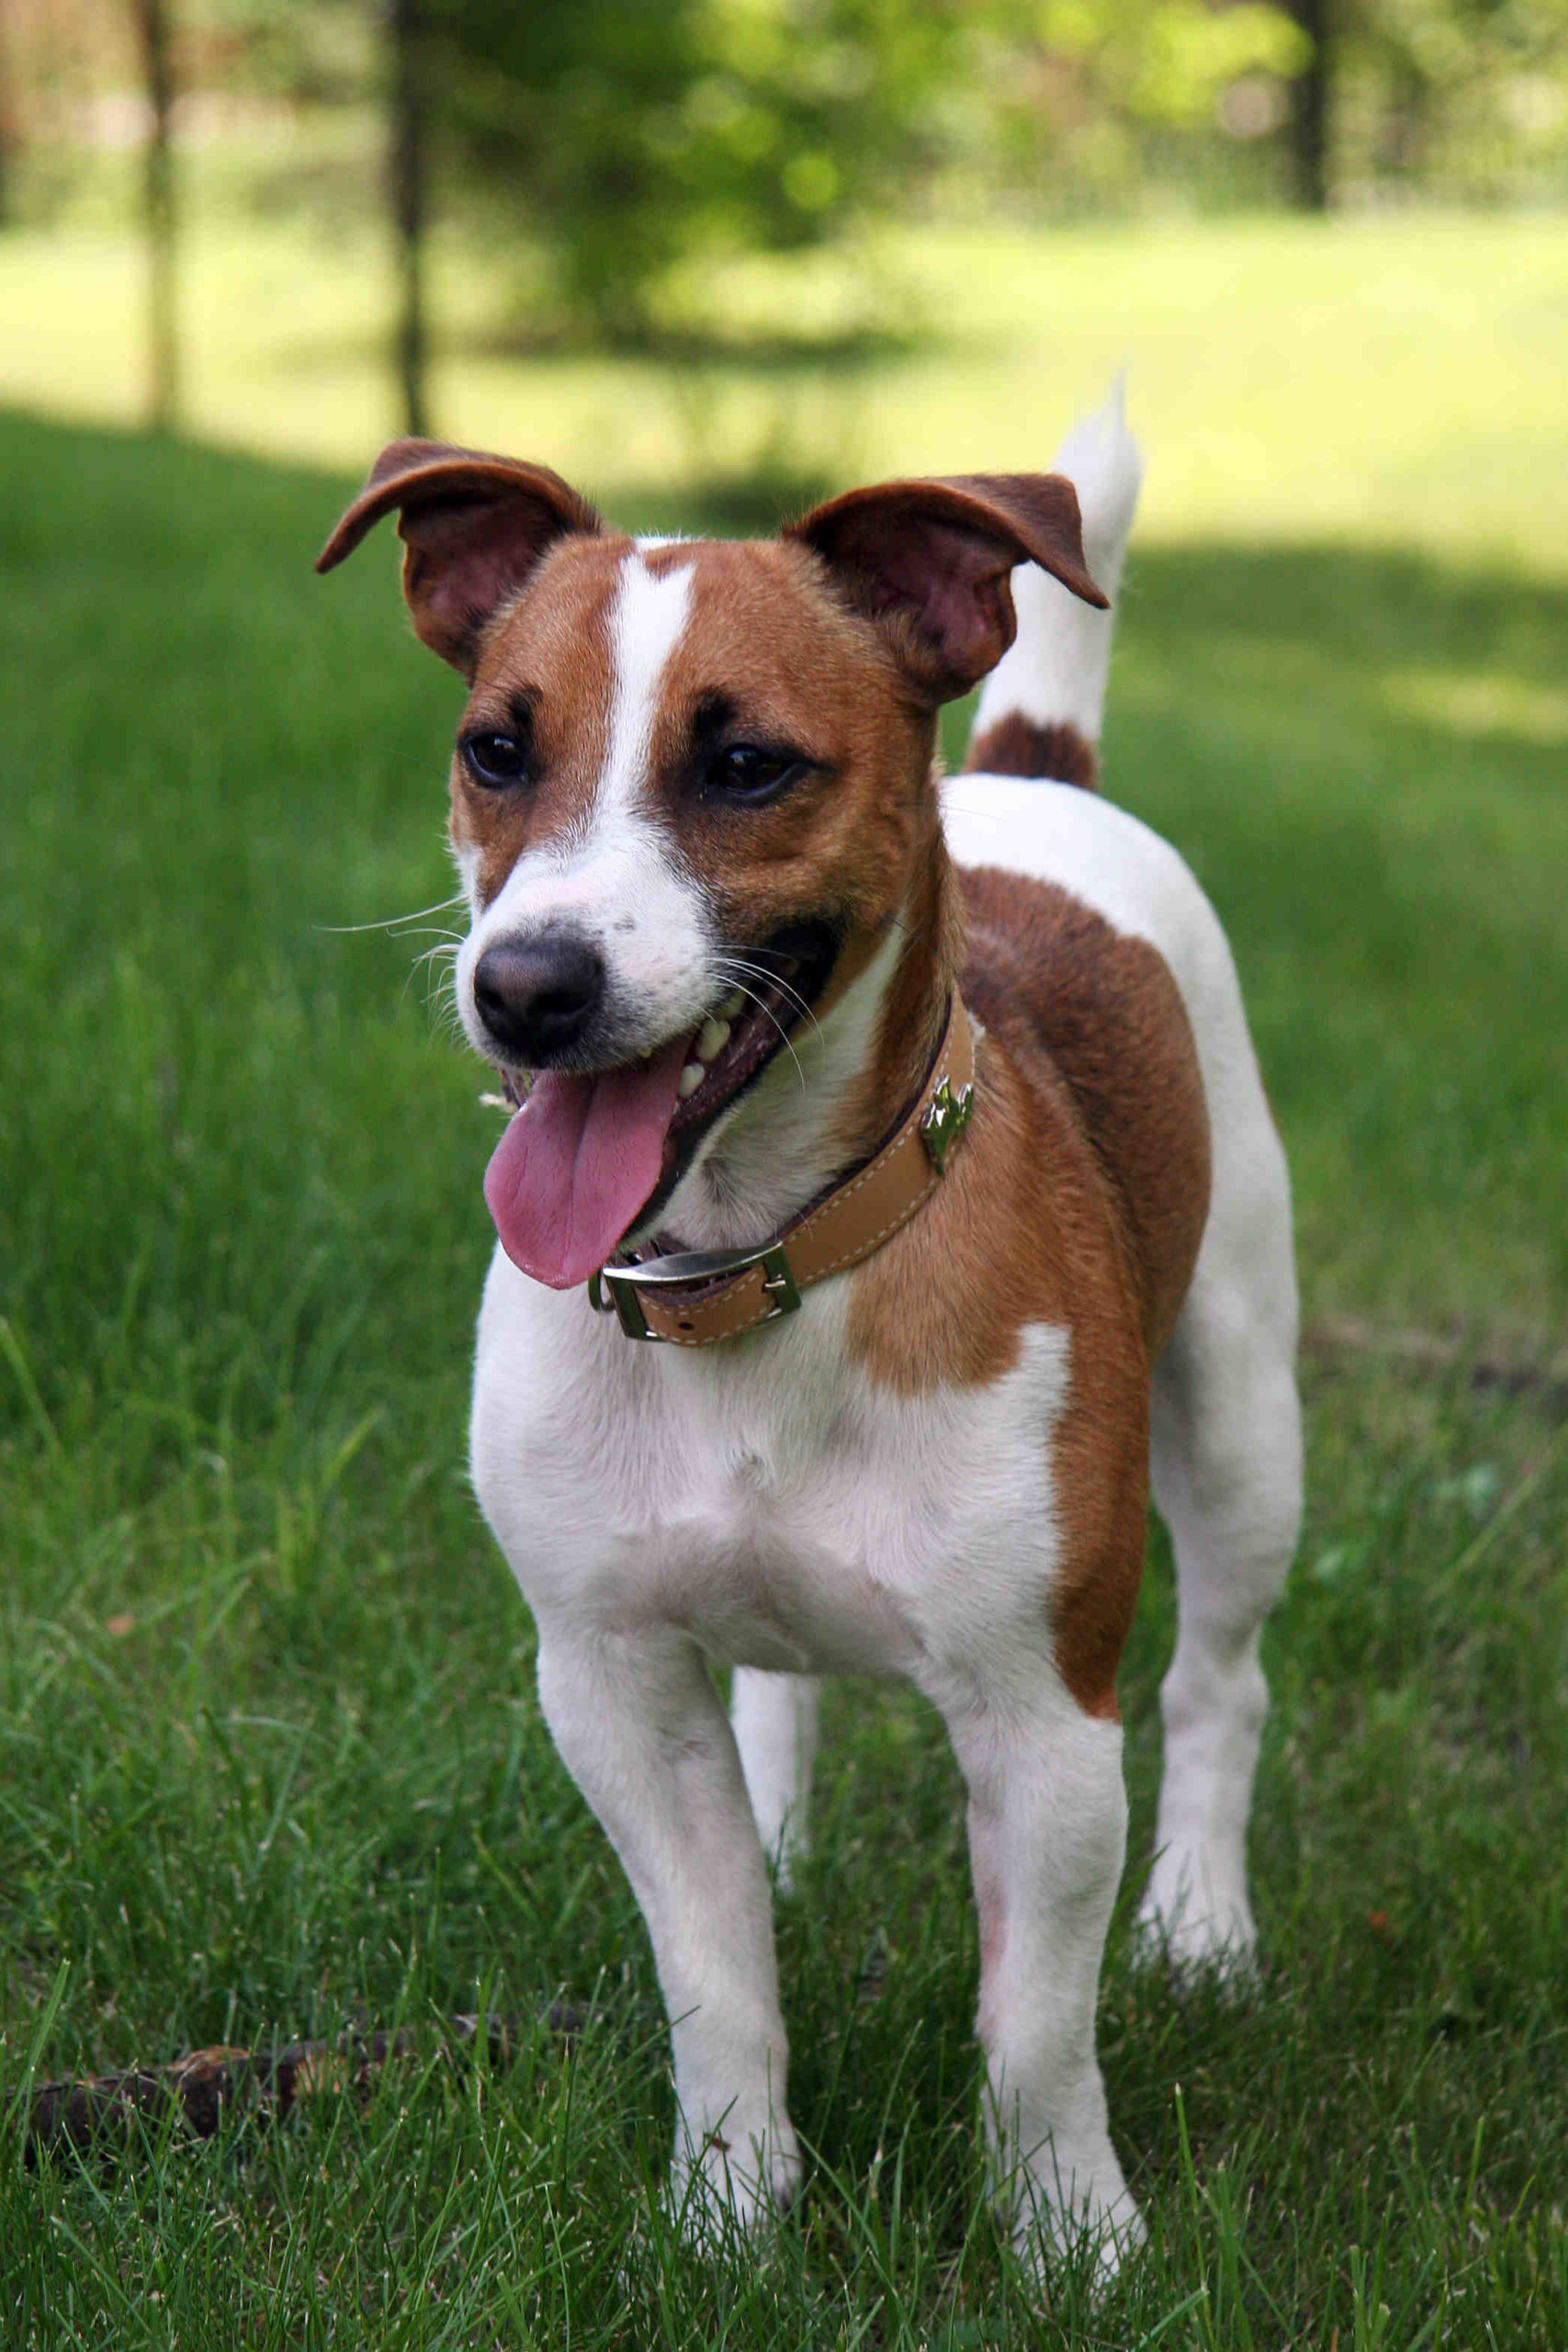 Is Jack Russell the smartest dog?